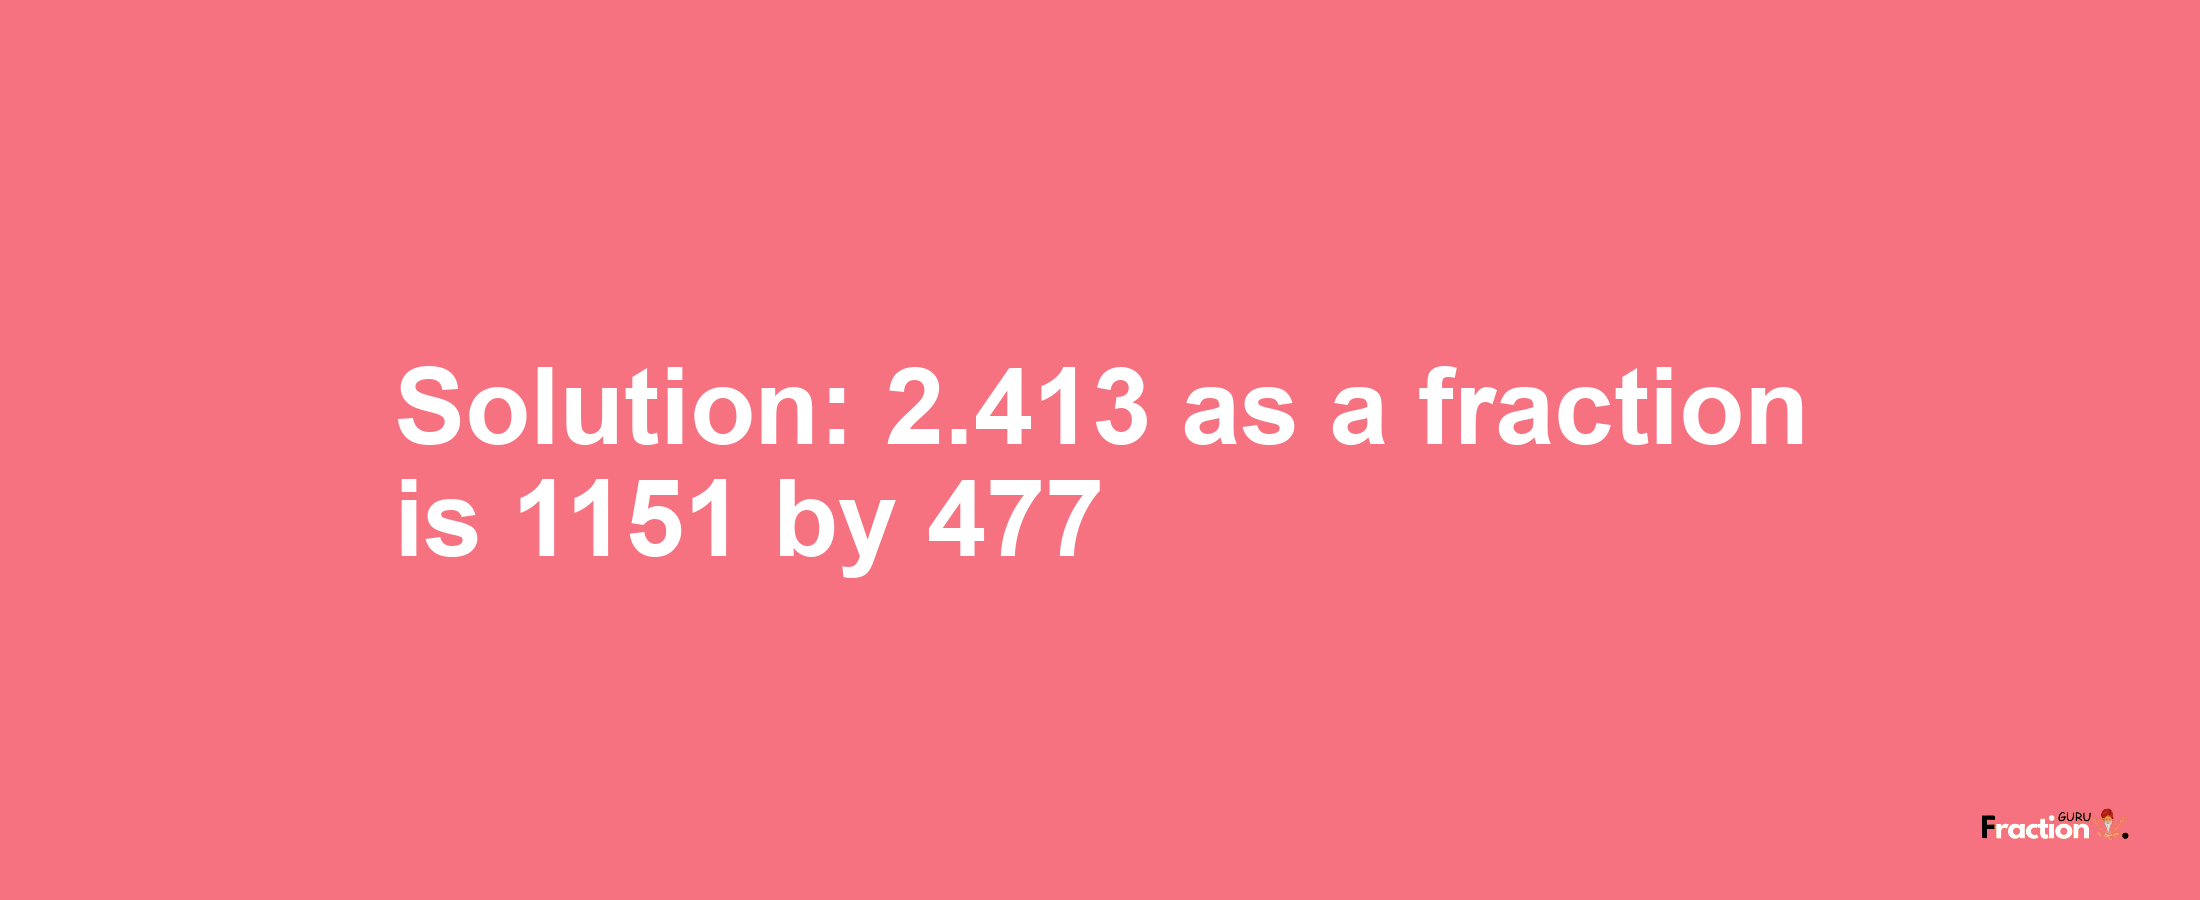 Solution:2.413 as a fraction is 1151/477